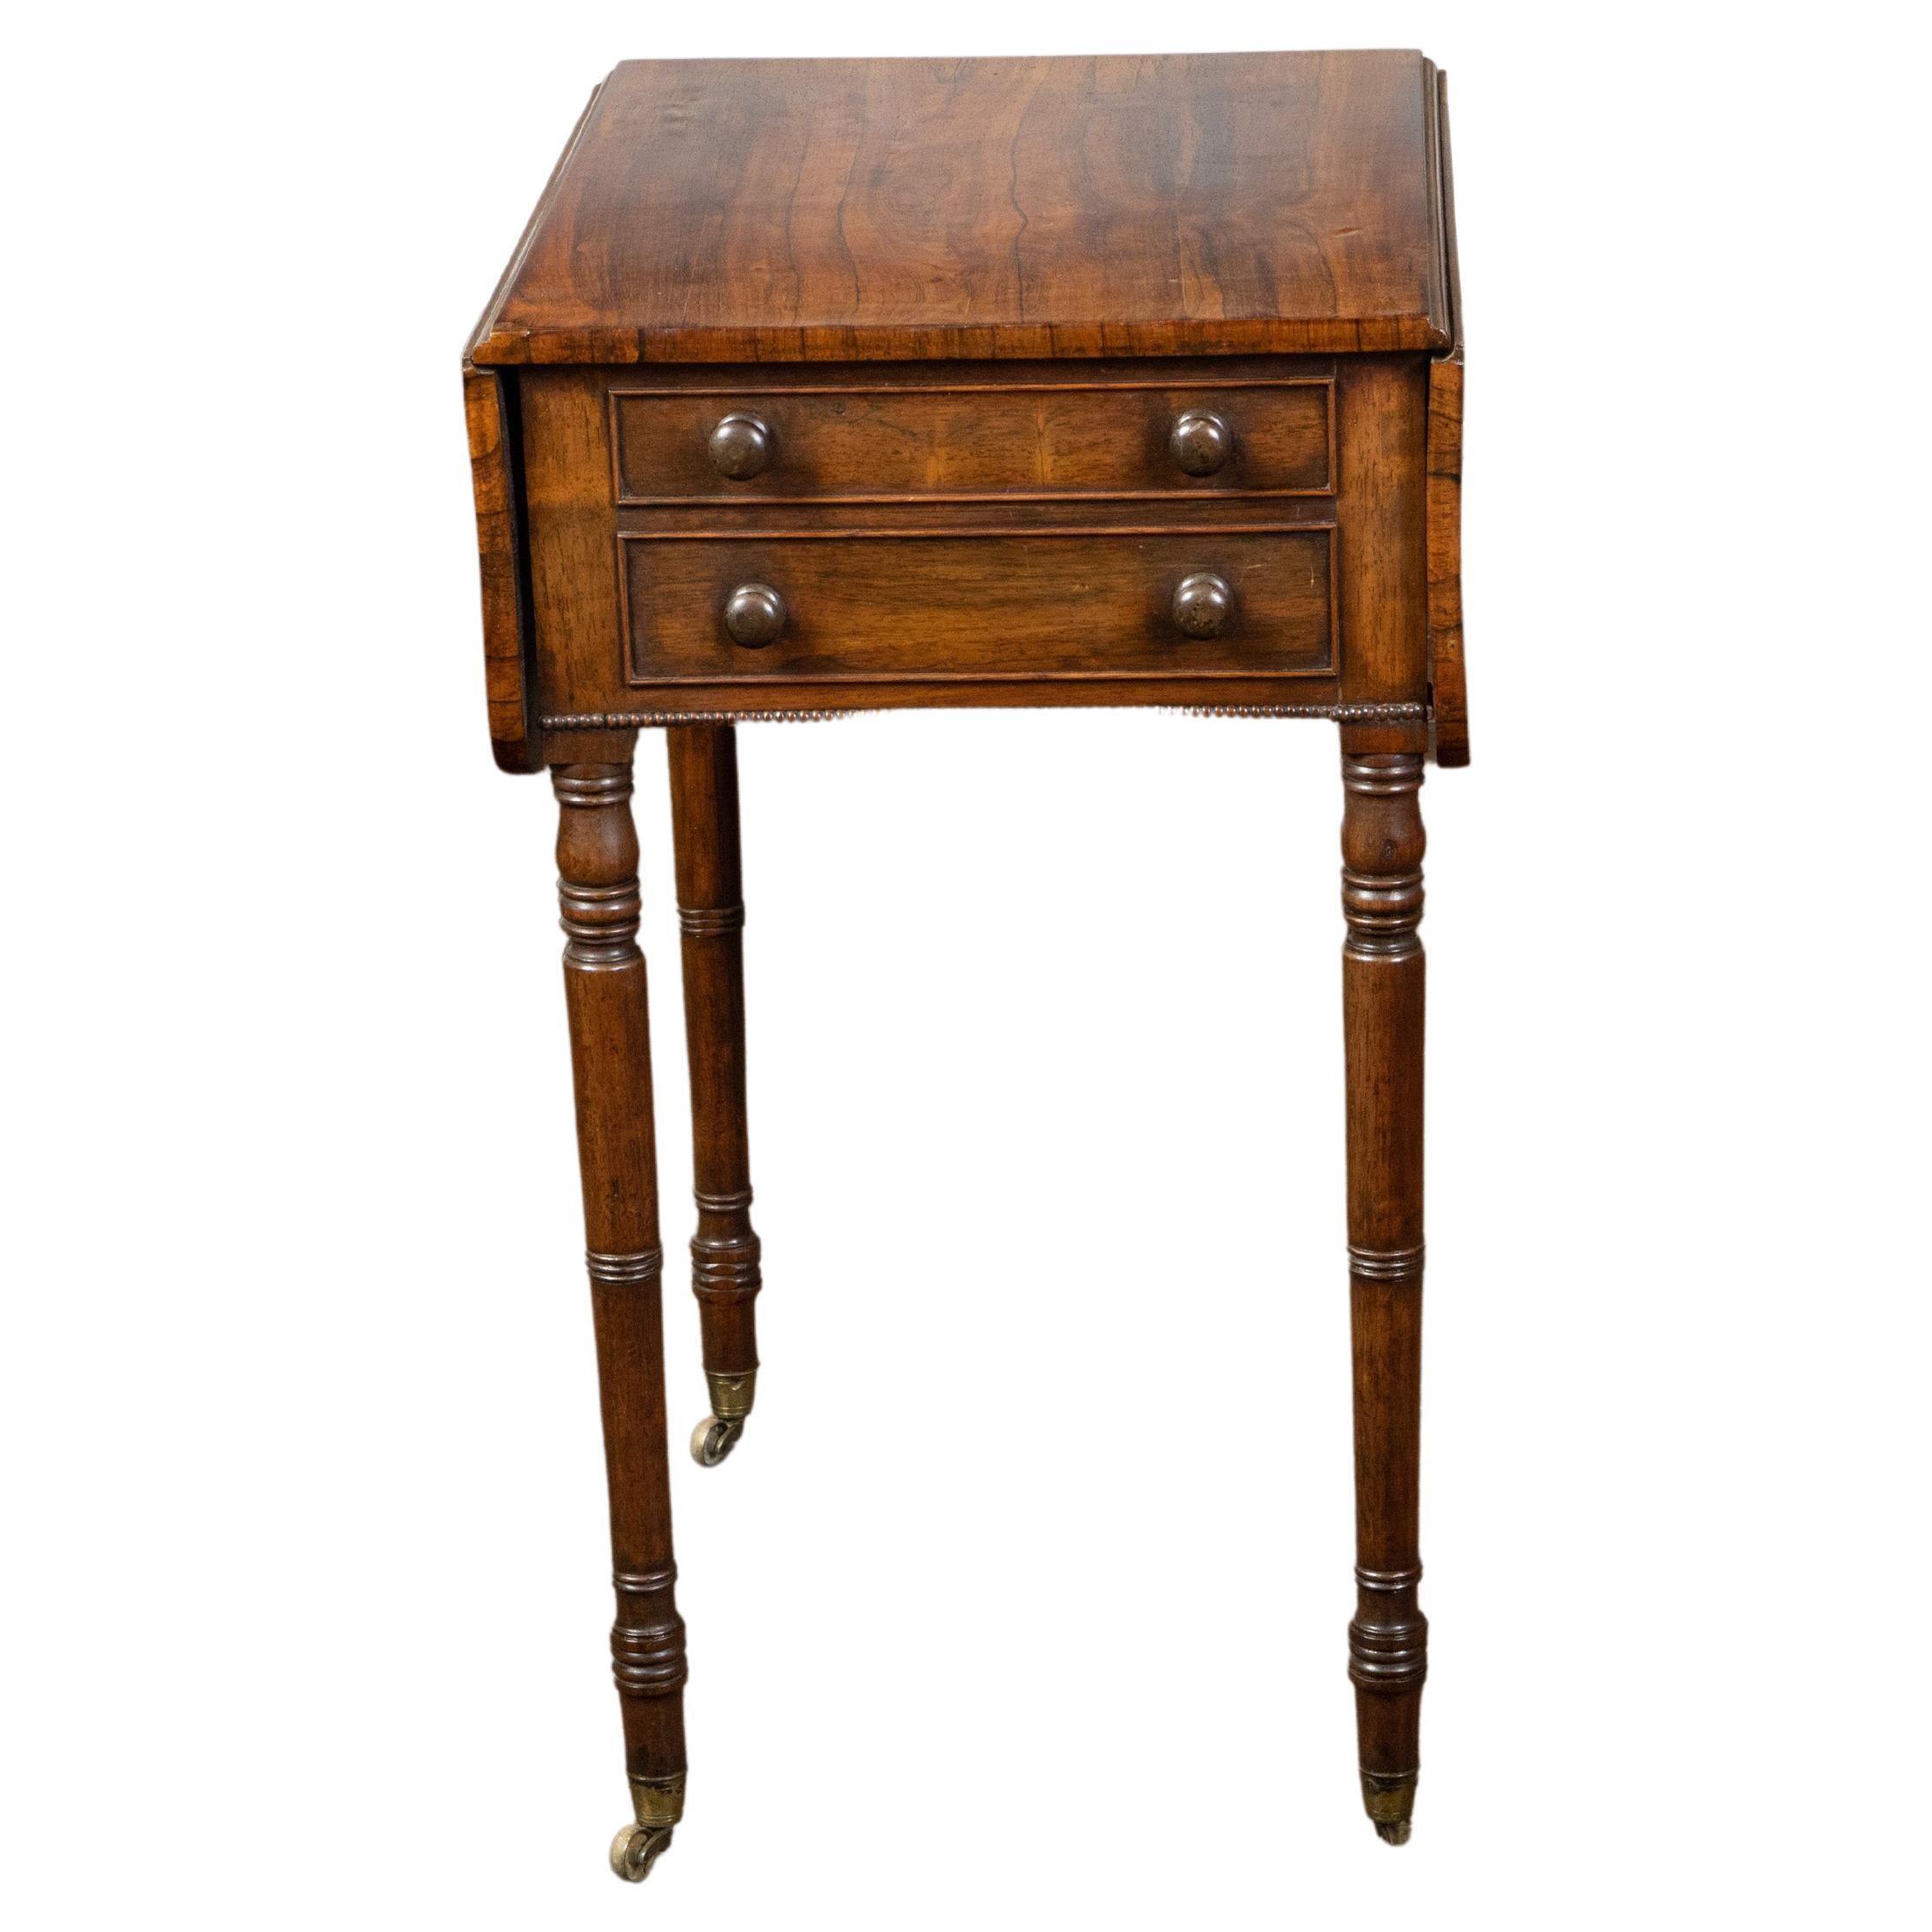 English Regency 1820s Mahogany Pembroke Table with Drop Leaves and Drawers For Sale